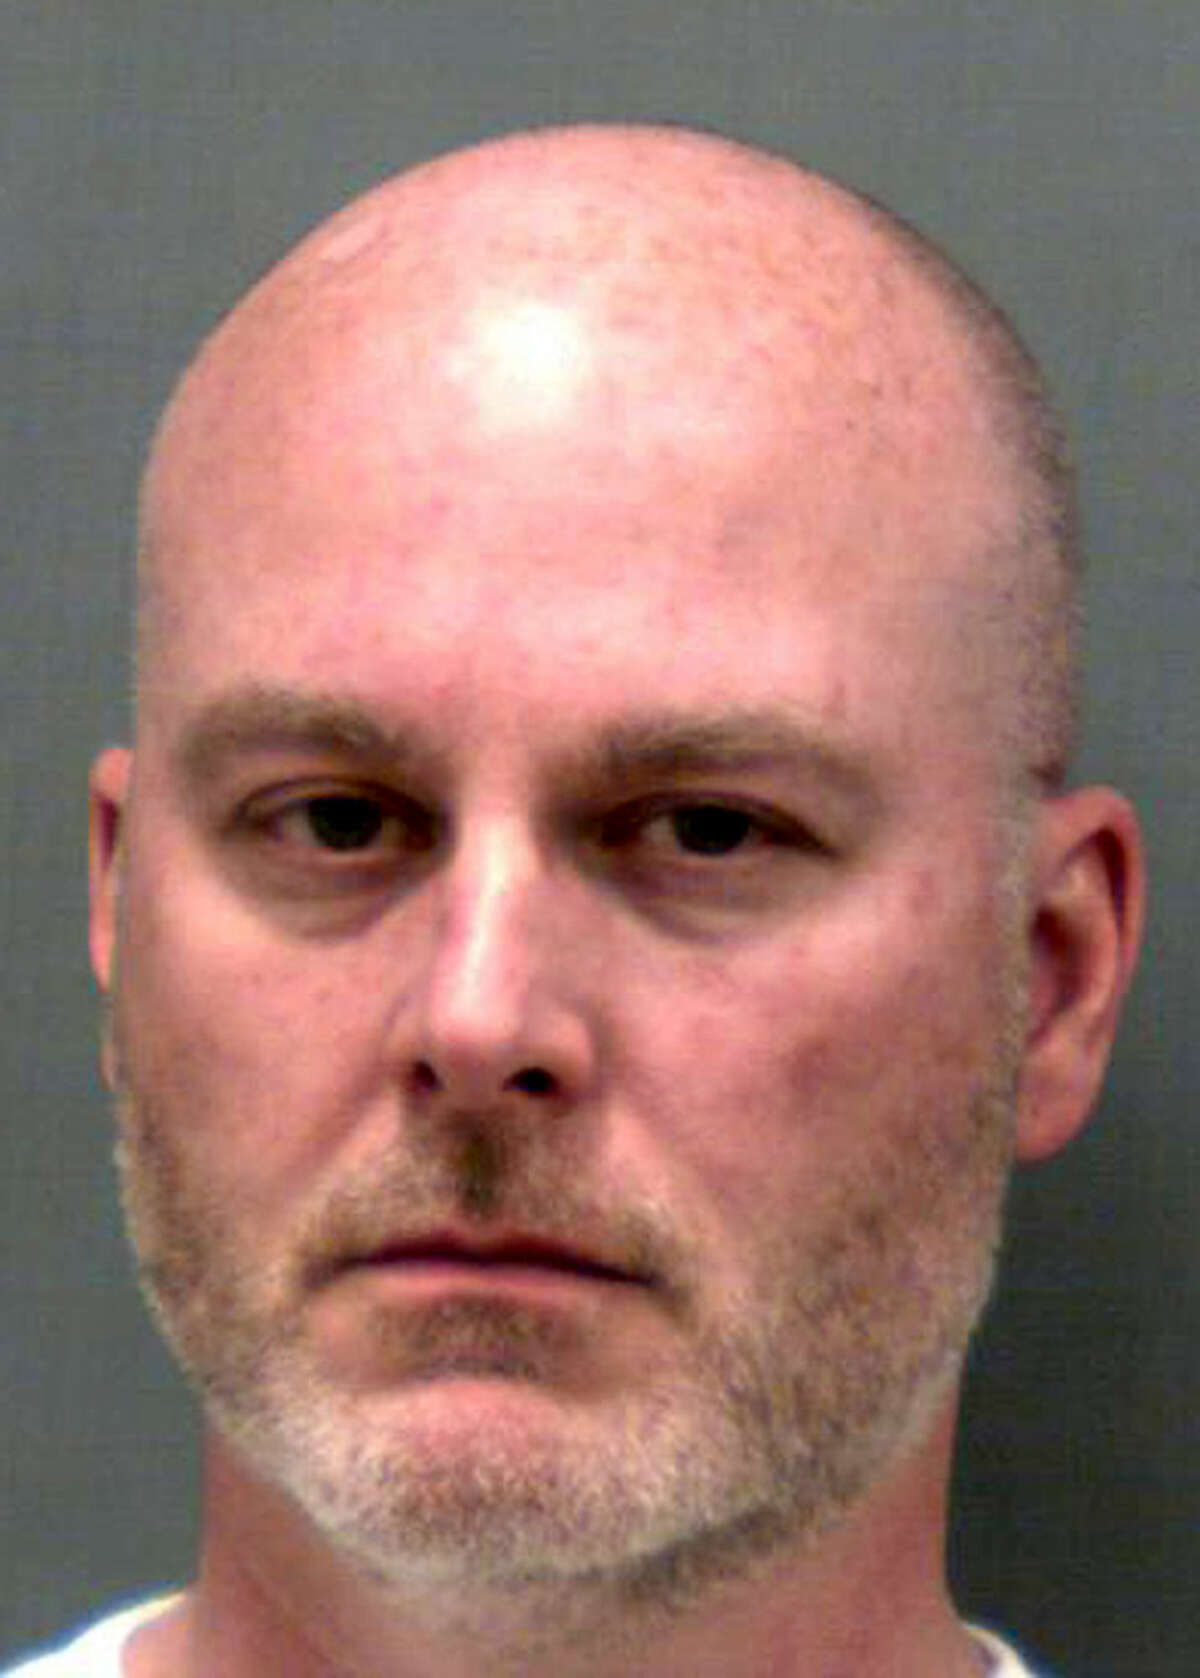 William Ruscoe is shown in this photo provided by the Connecticut Department of Correction. Ruscoe, of the Trumbull police in Connecticut, began a 30-month prison term in January 2015 after pleading guilty to second-degree sexual assault of a 17-year-old girl he met through a program for young people interested in law enforcement.